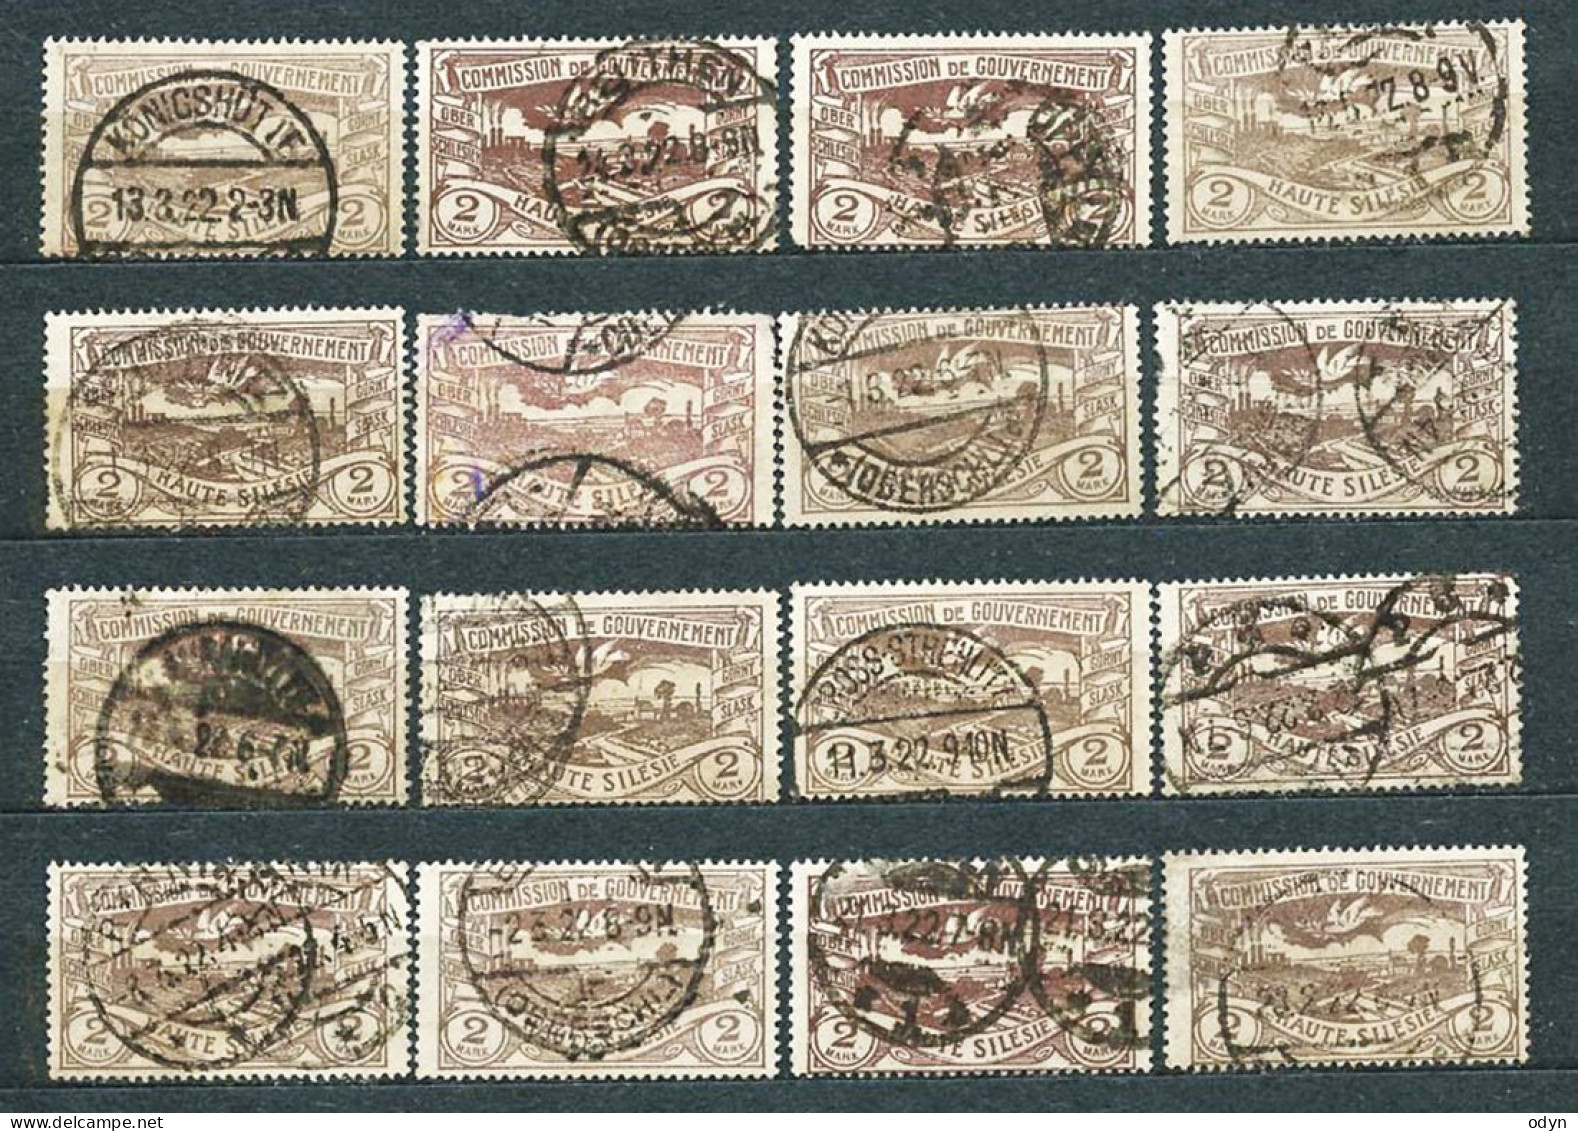 Plebiscite, Upper Silesia, 1920; lot of 267 stamps from set MiNr 13-29 - used